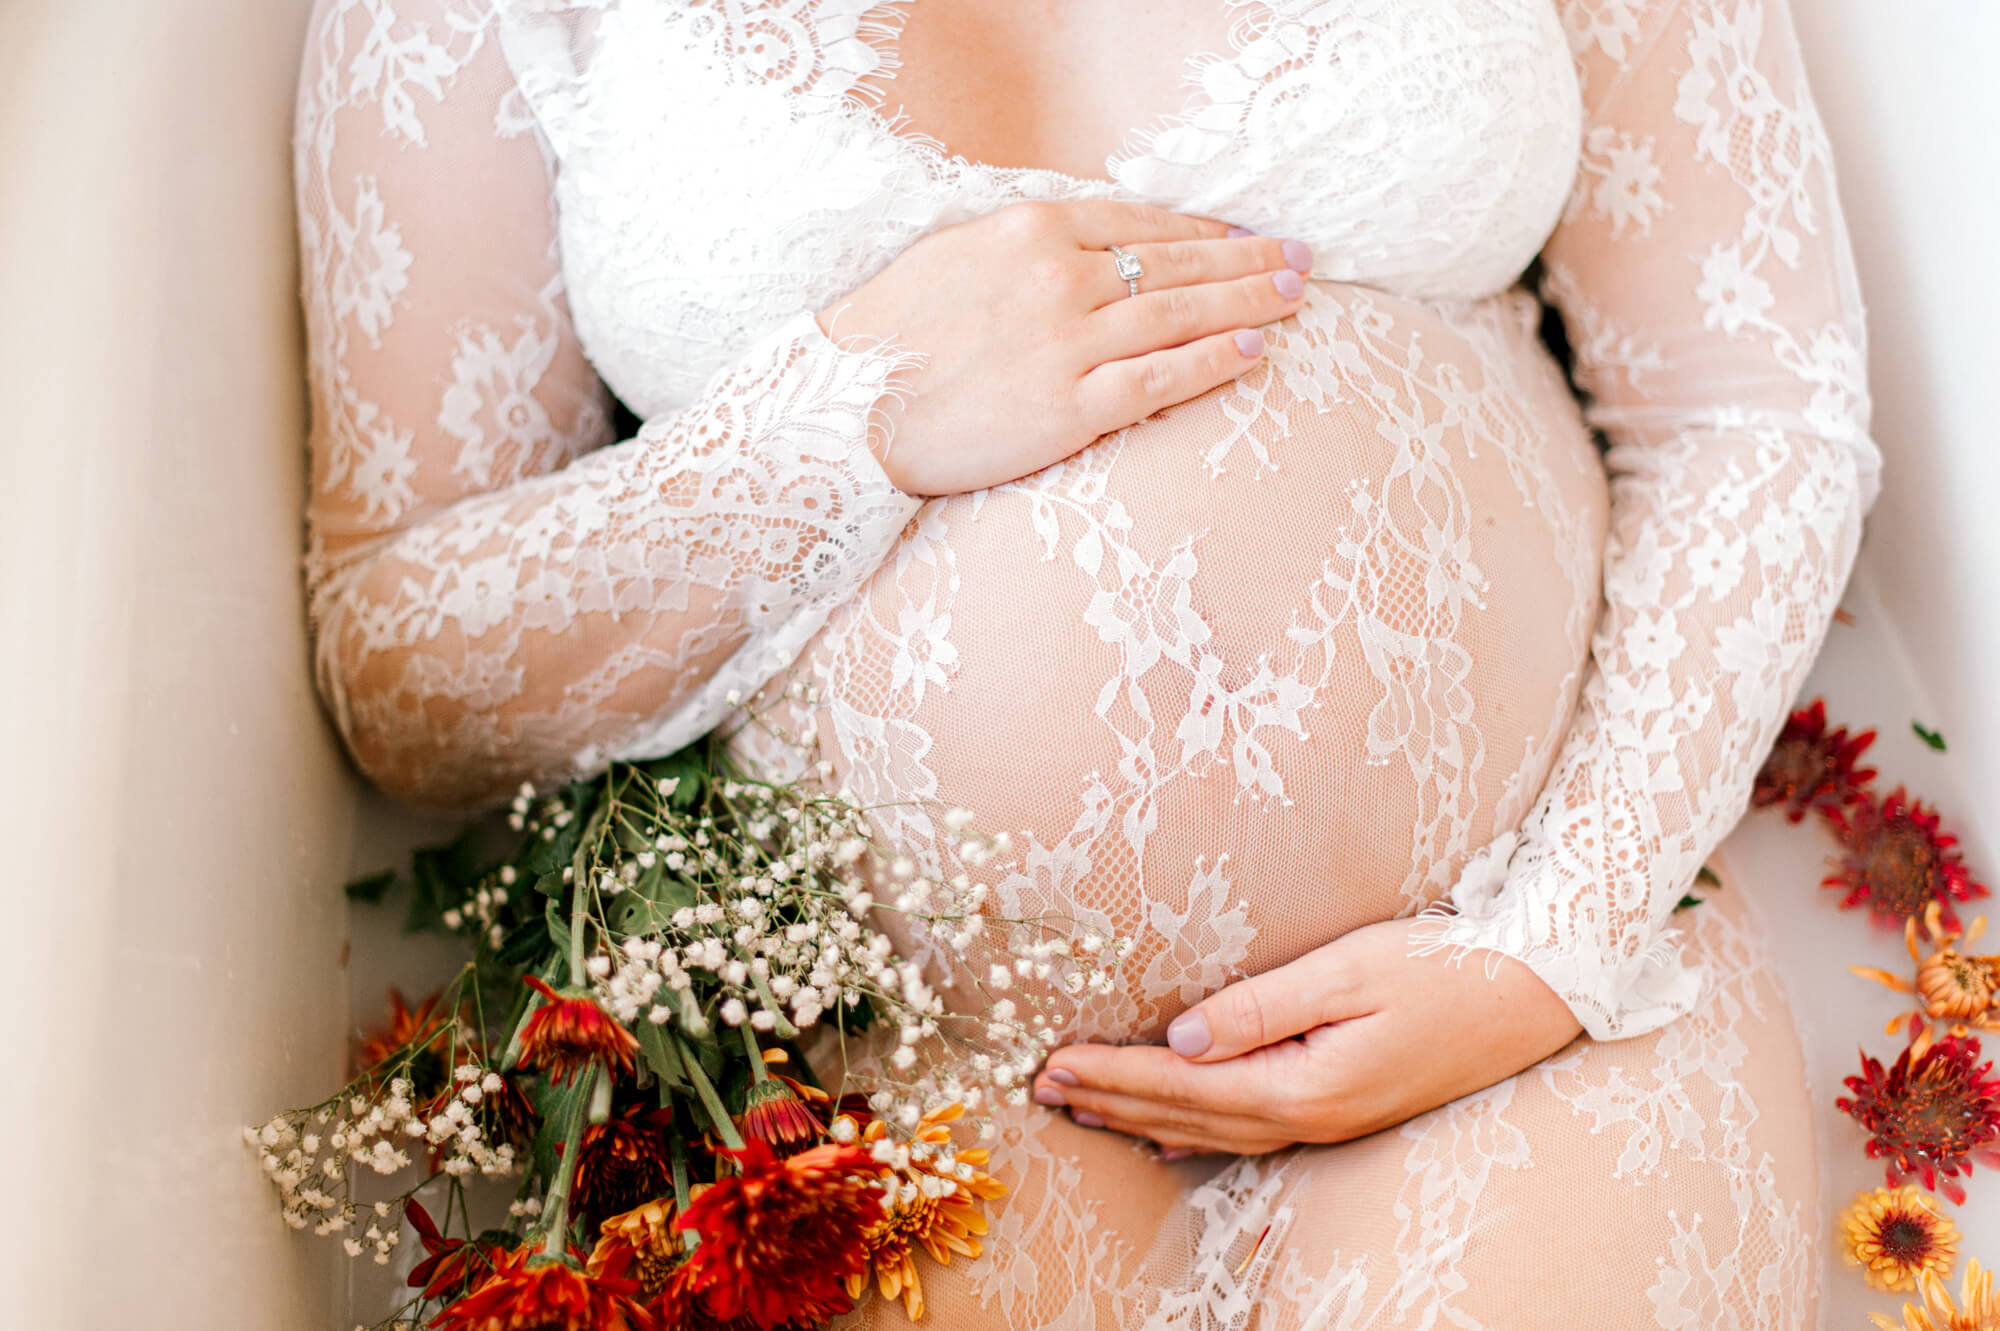 close up belly photo of soon to be girl mom holding her belly in a lace dress with florals orlando midwives